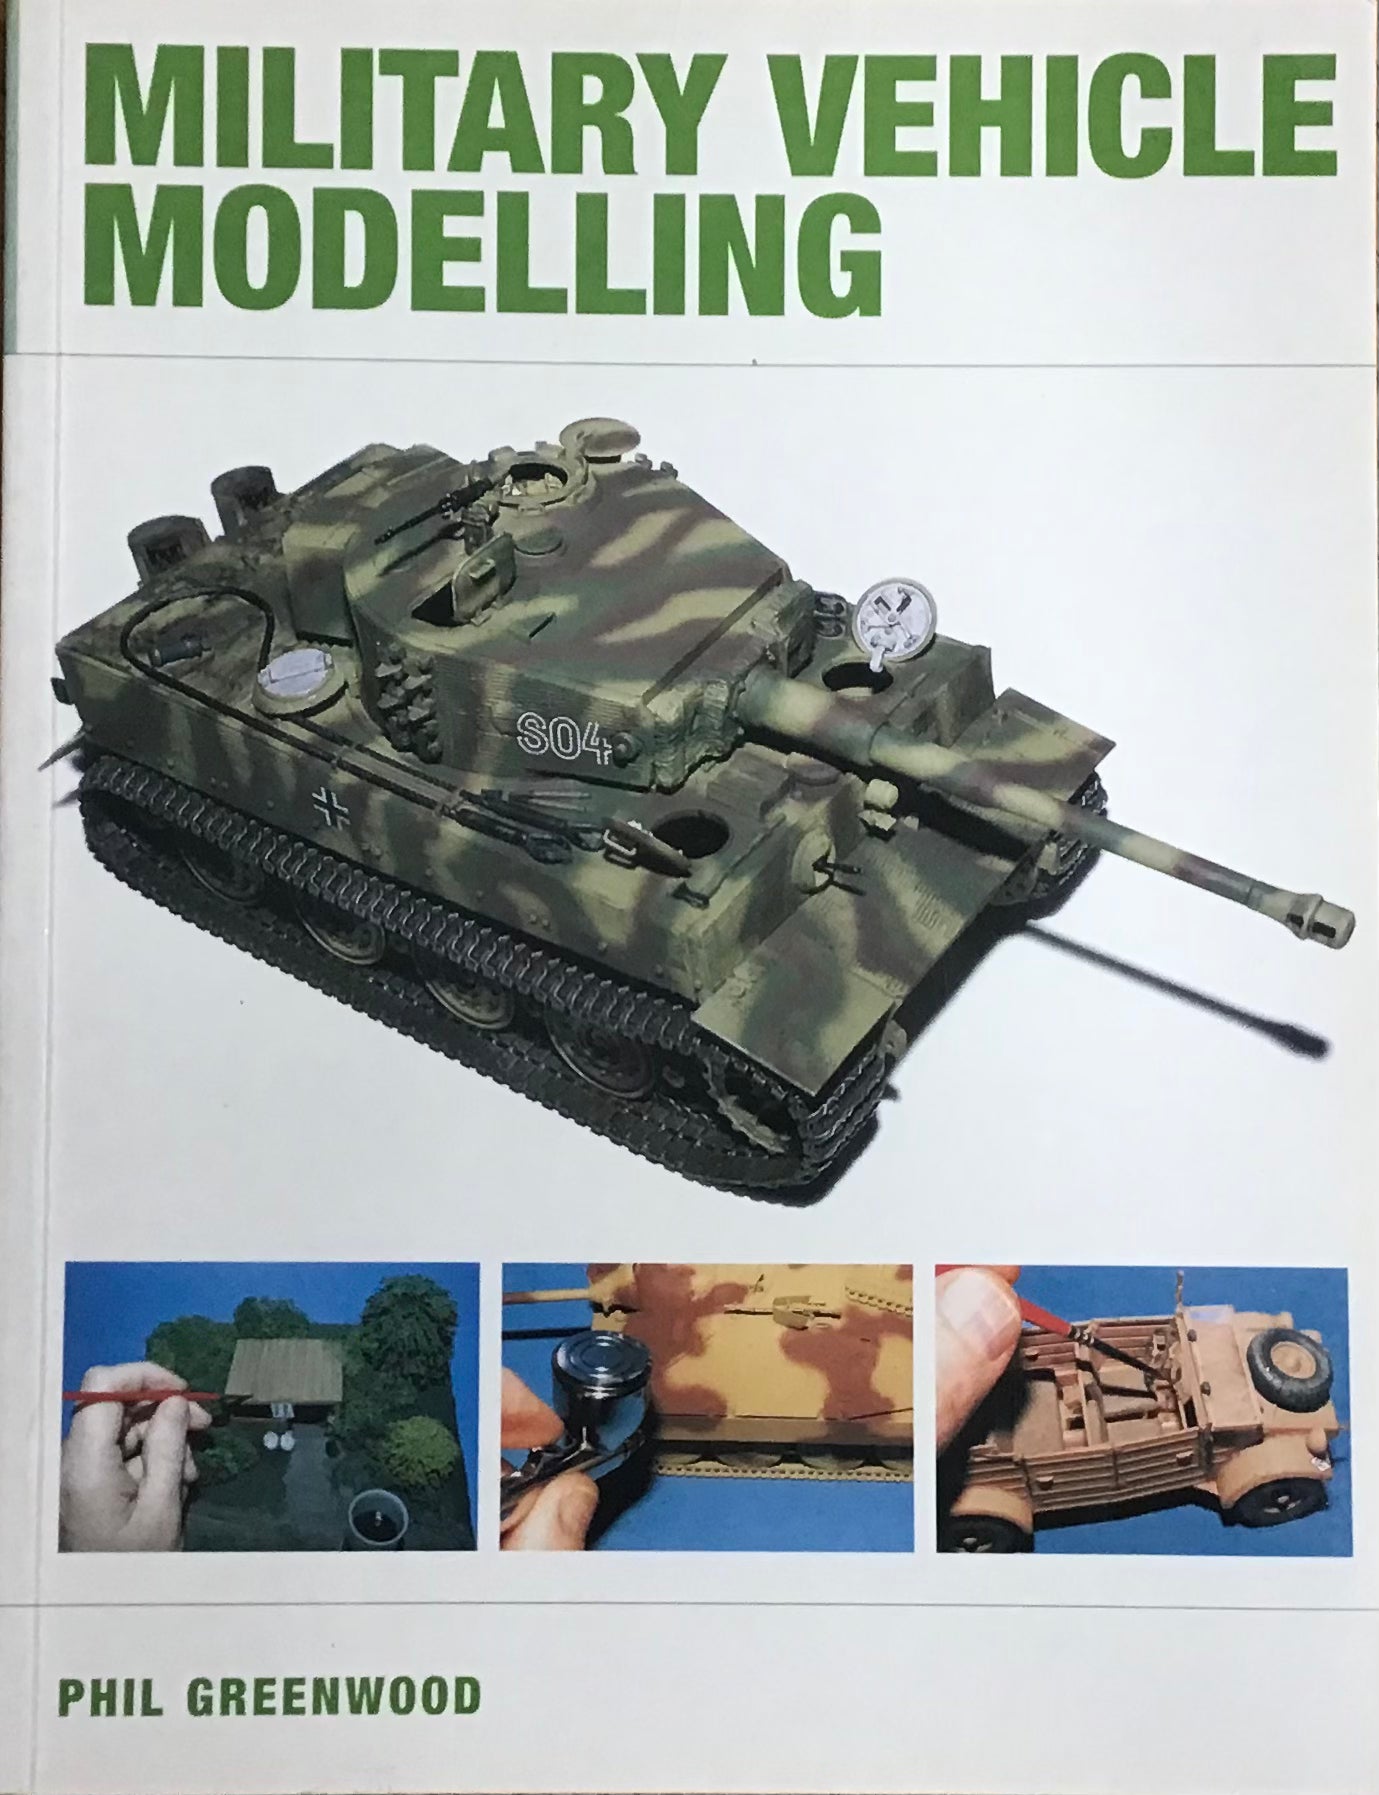 Military Vehicle Modelling by Phil Greenwood - Chester Model Centre